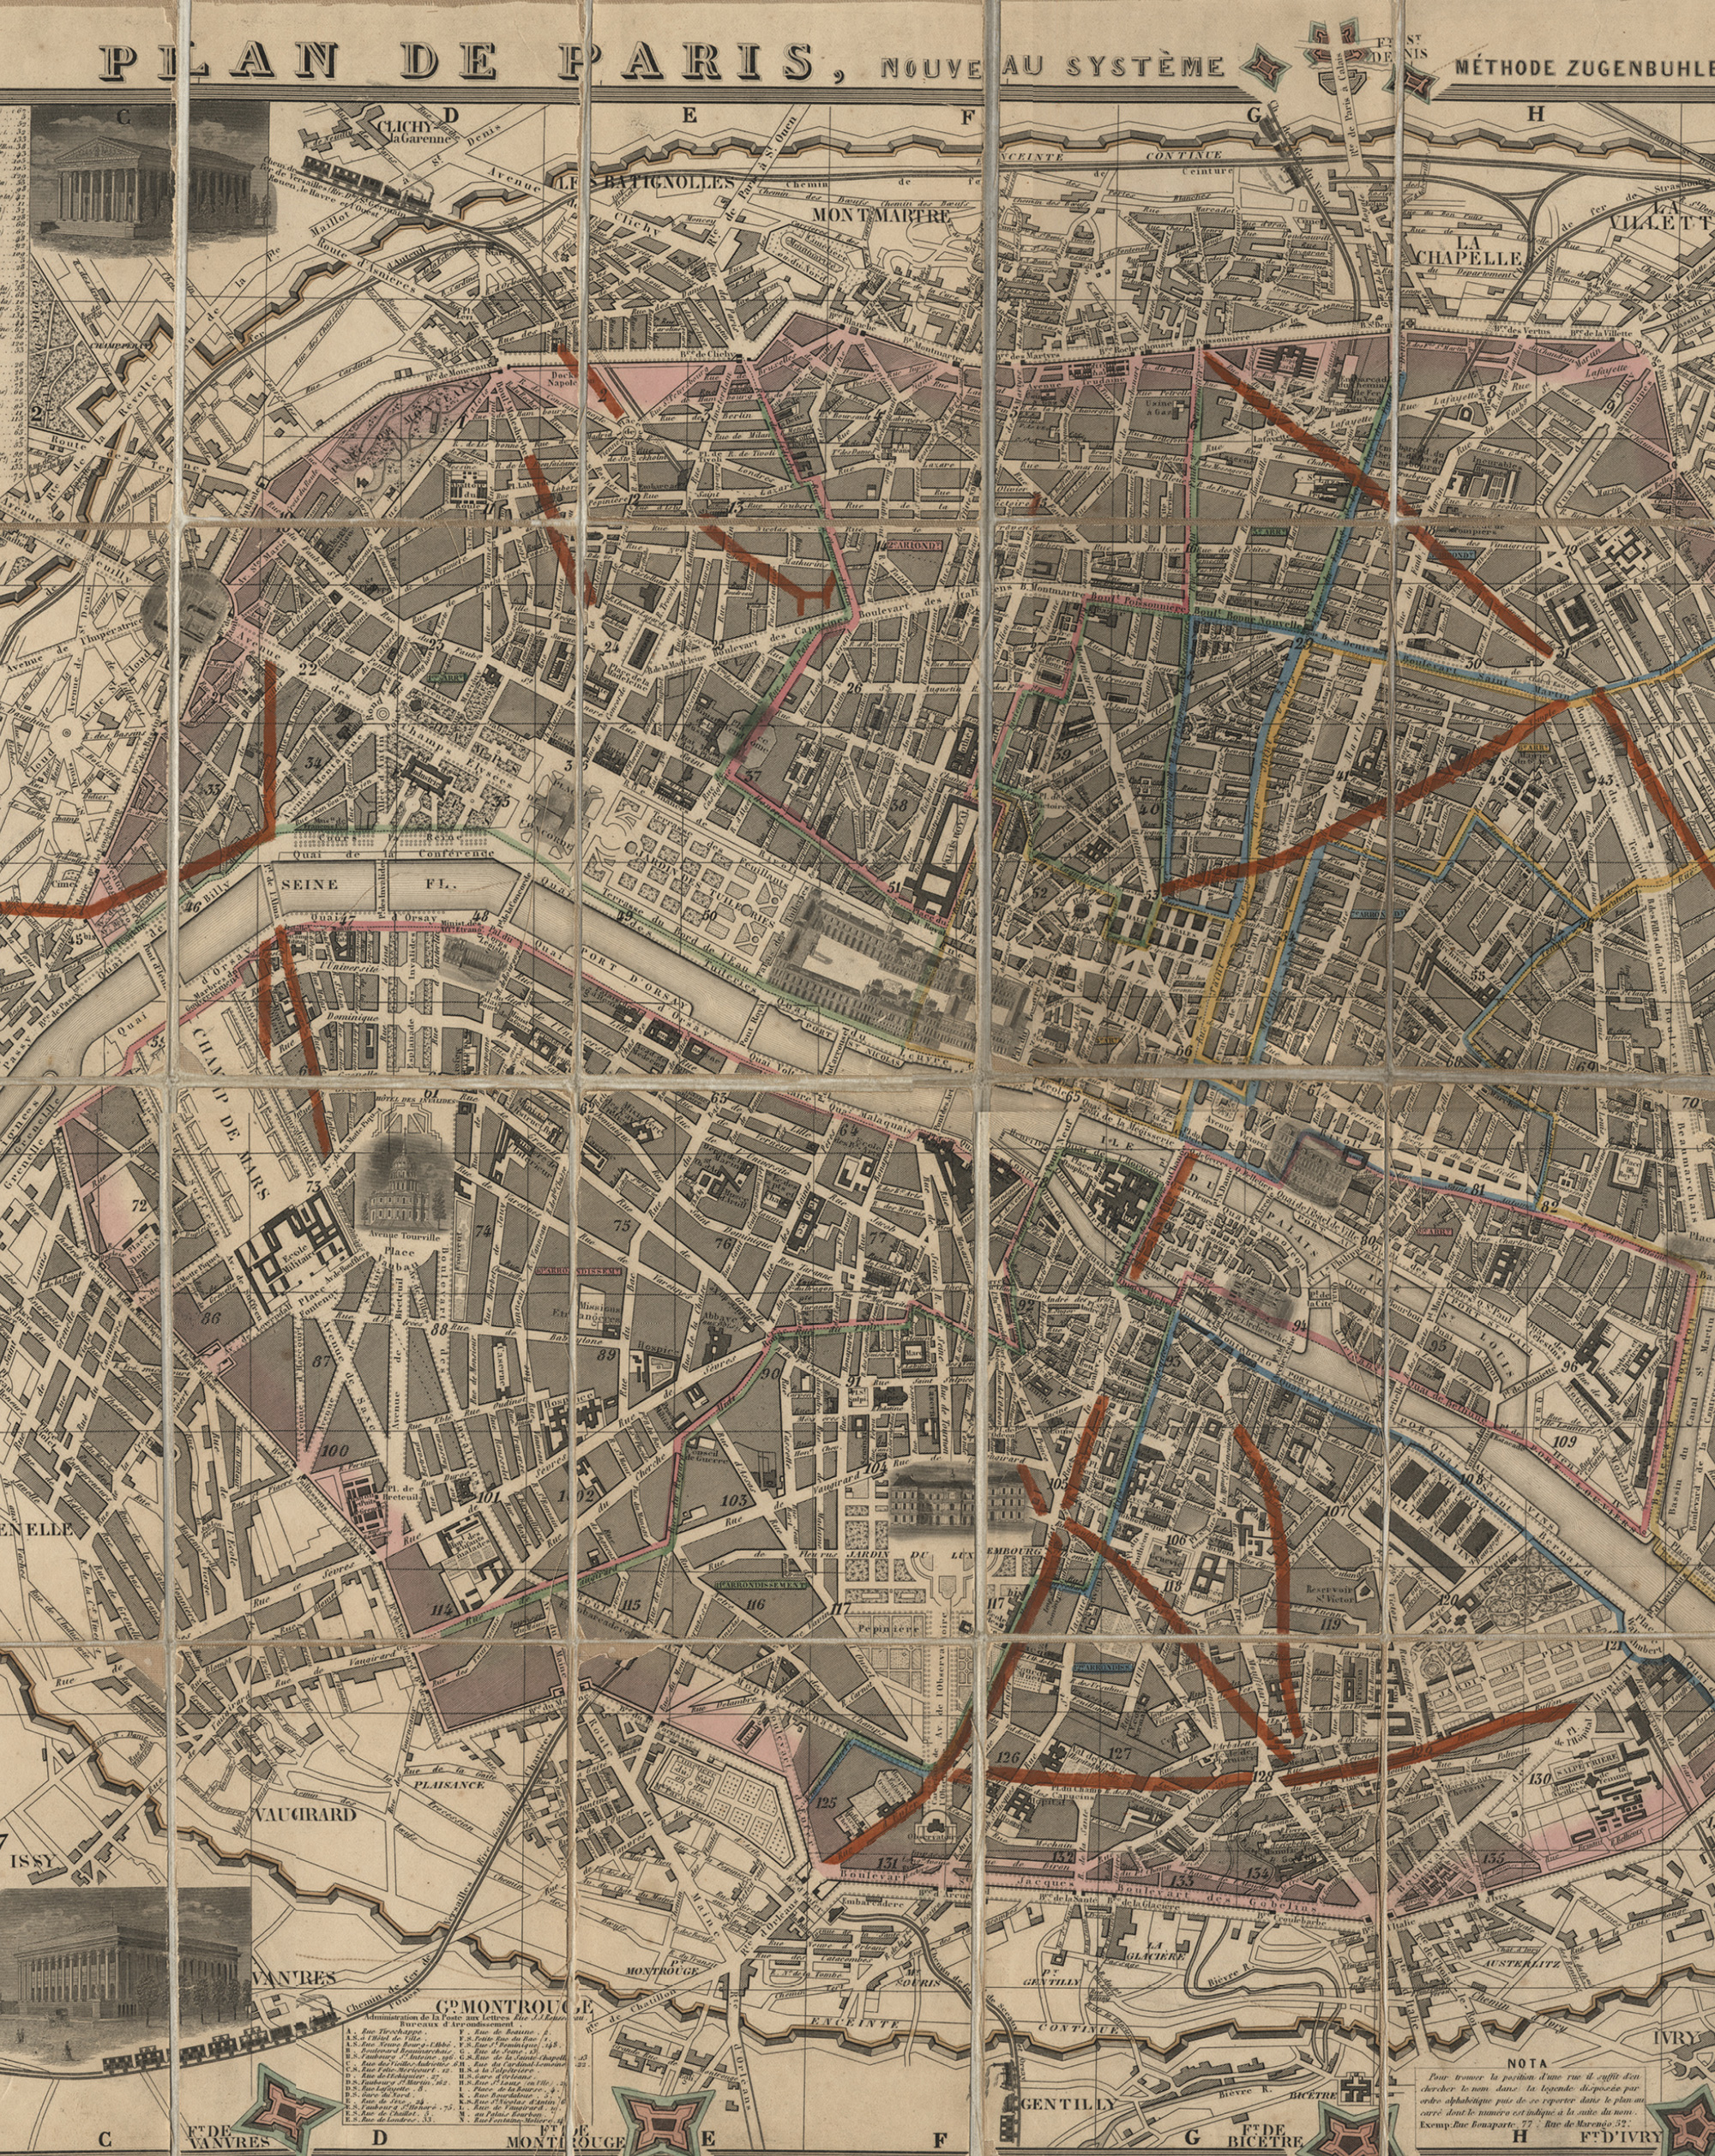 One of a series of nineteenth-century annual maps depicting the projected
road construction of Paris. This 1859 map includes the cut for the new
rue Monge (indicated by one of the brown lines in the lower right), which would
uncover the arènes de Lutèce.